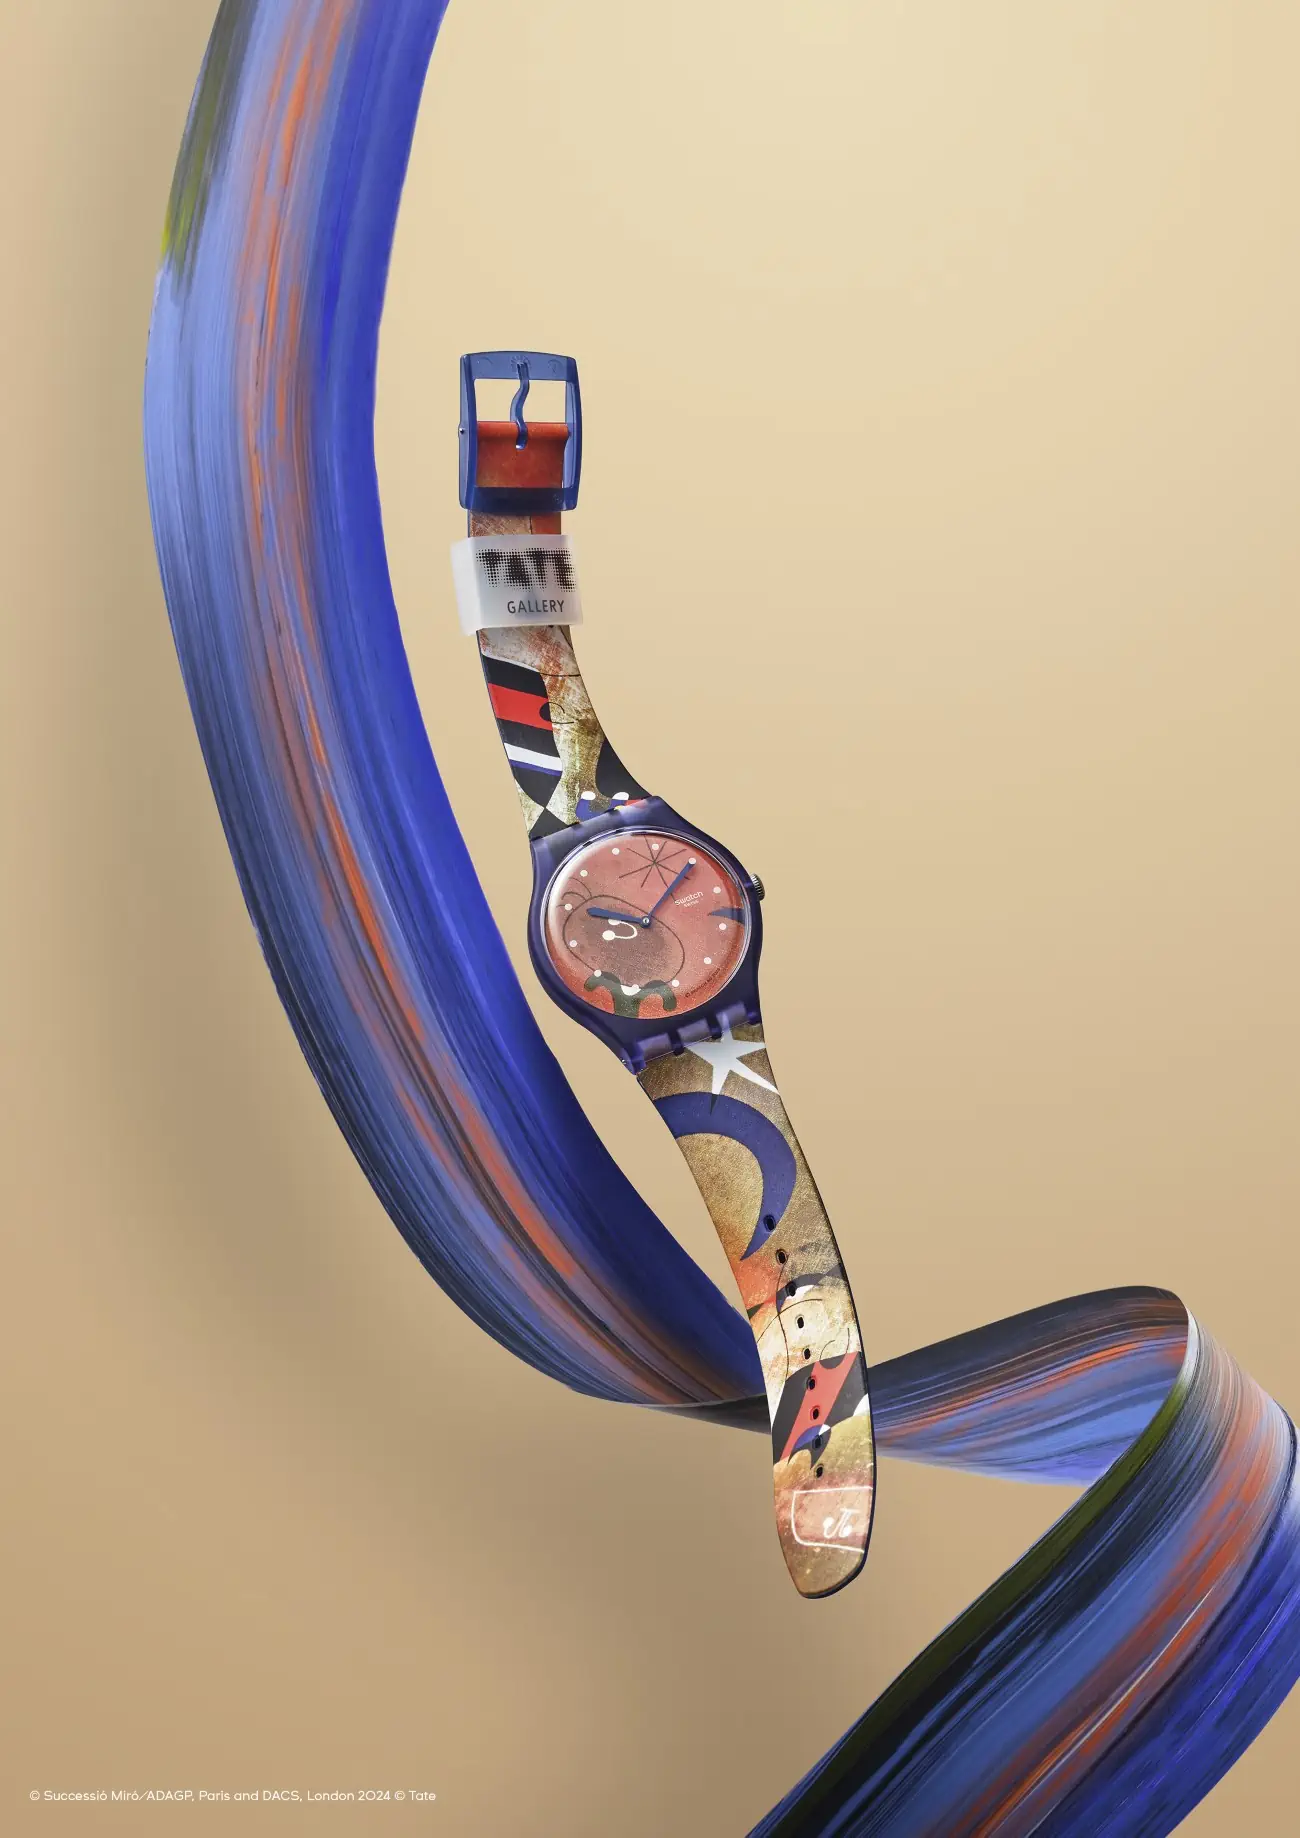 Swatch x Tate Gallery: A collaboration of art and watchmaking